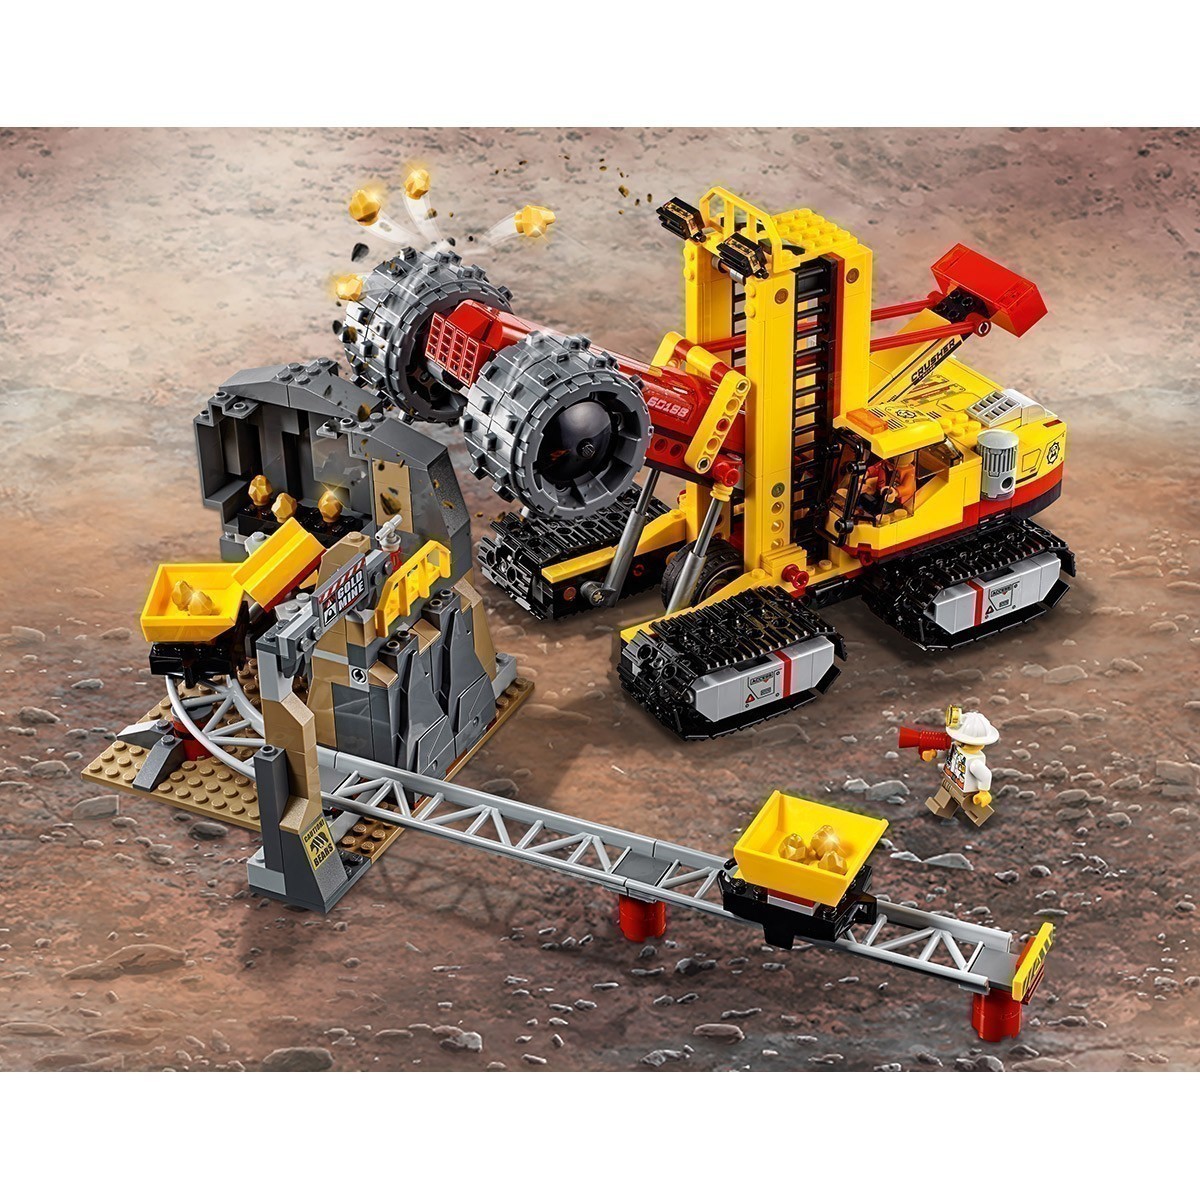 LEGO® City - 60188 Mining Experts Site